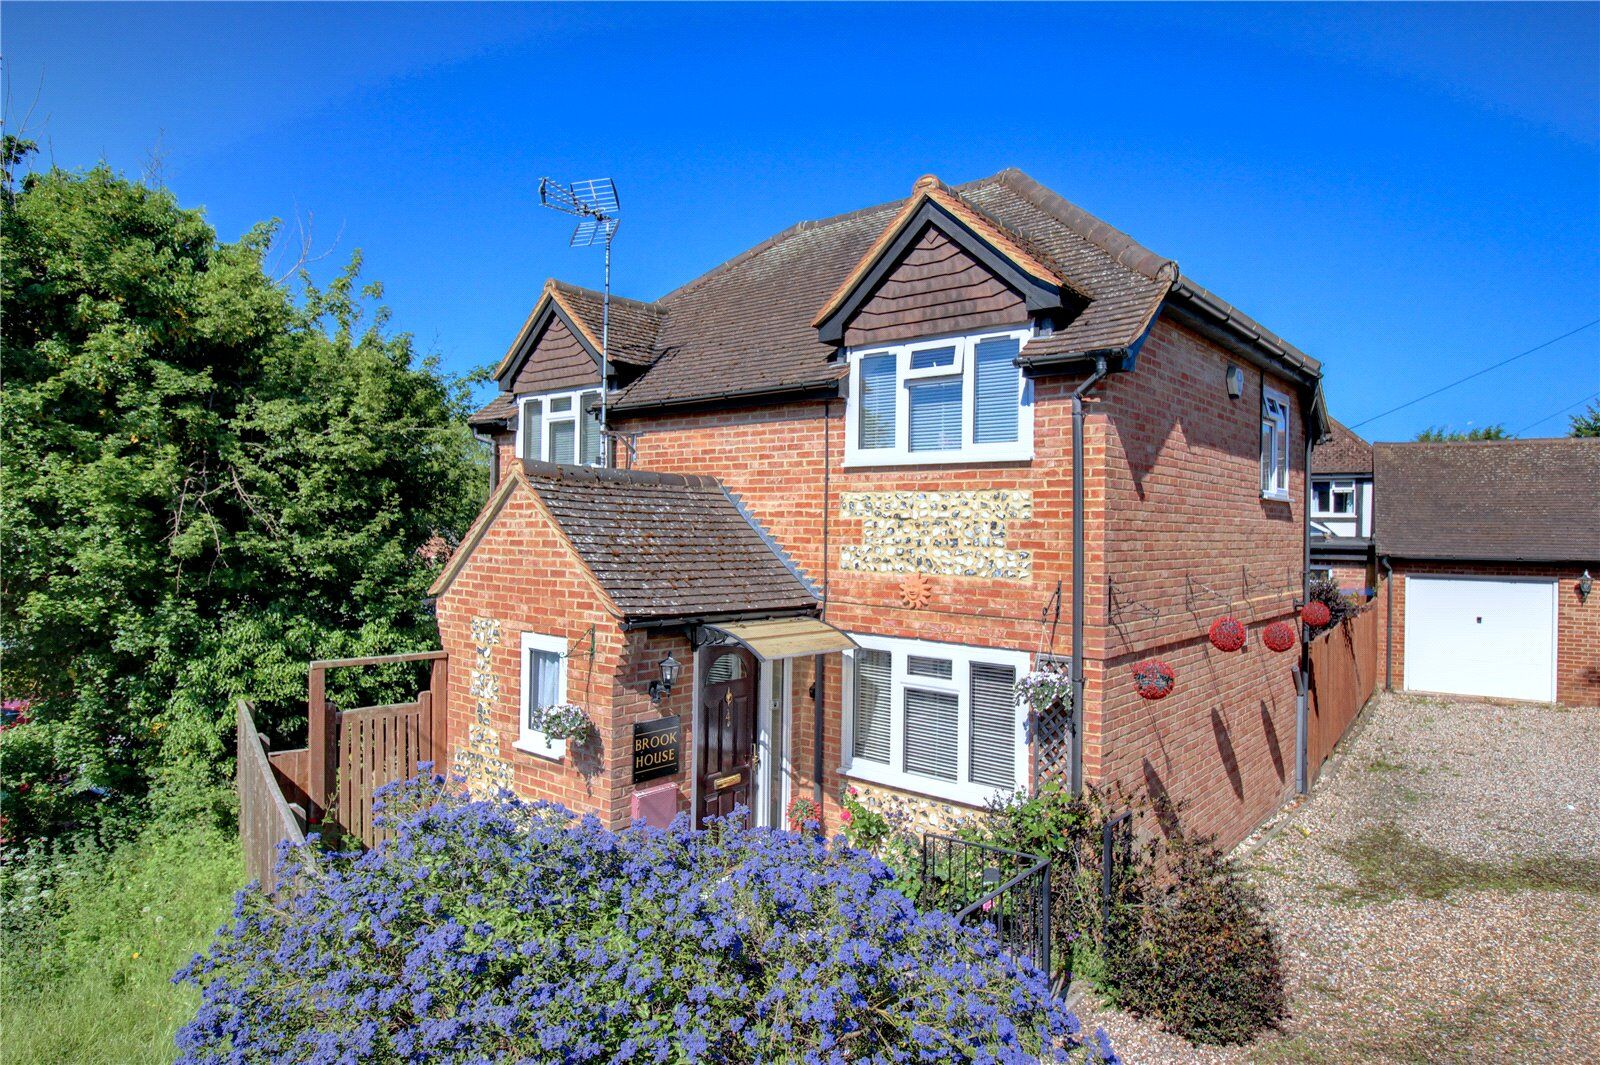 3 bedroom detached house for sale Fryers Lane, High Wycombe, HP12, main image